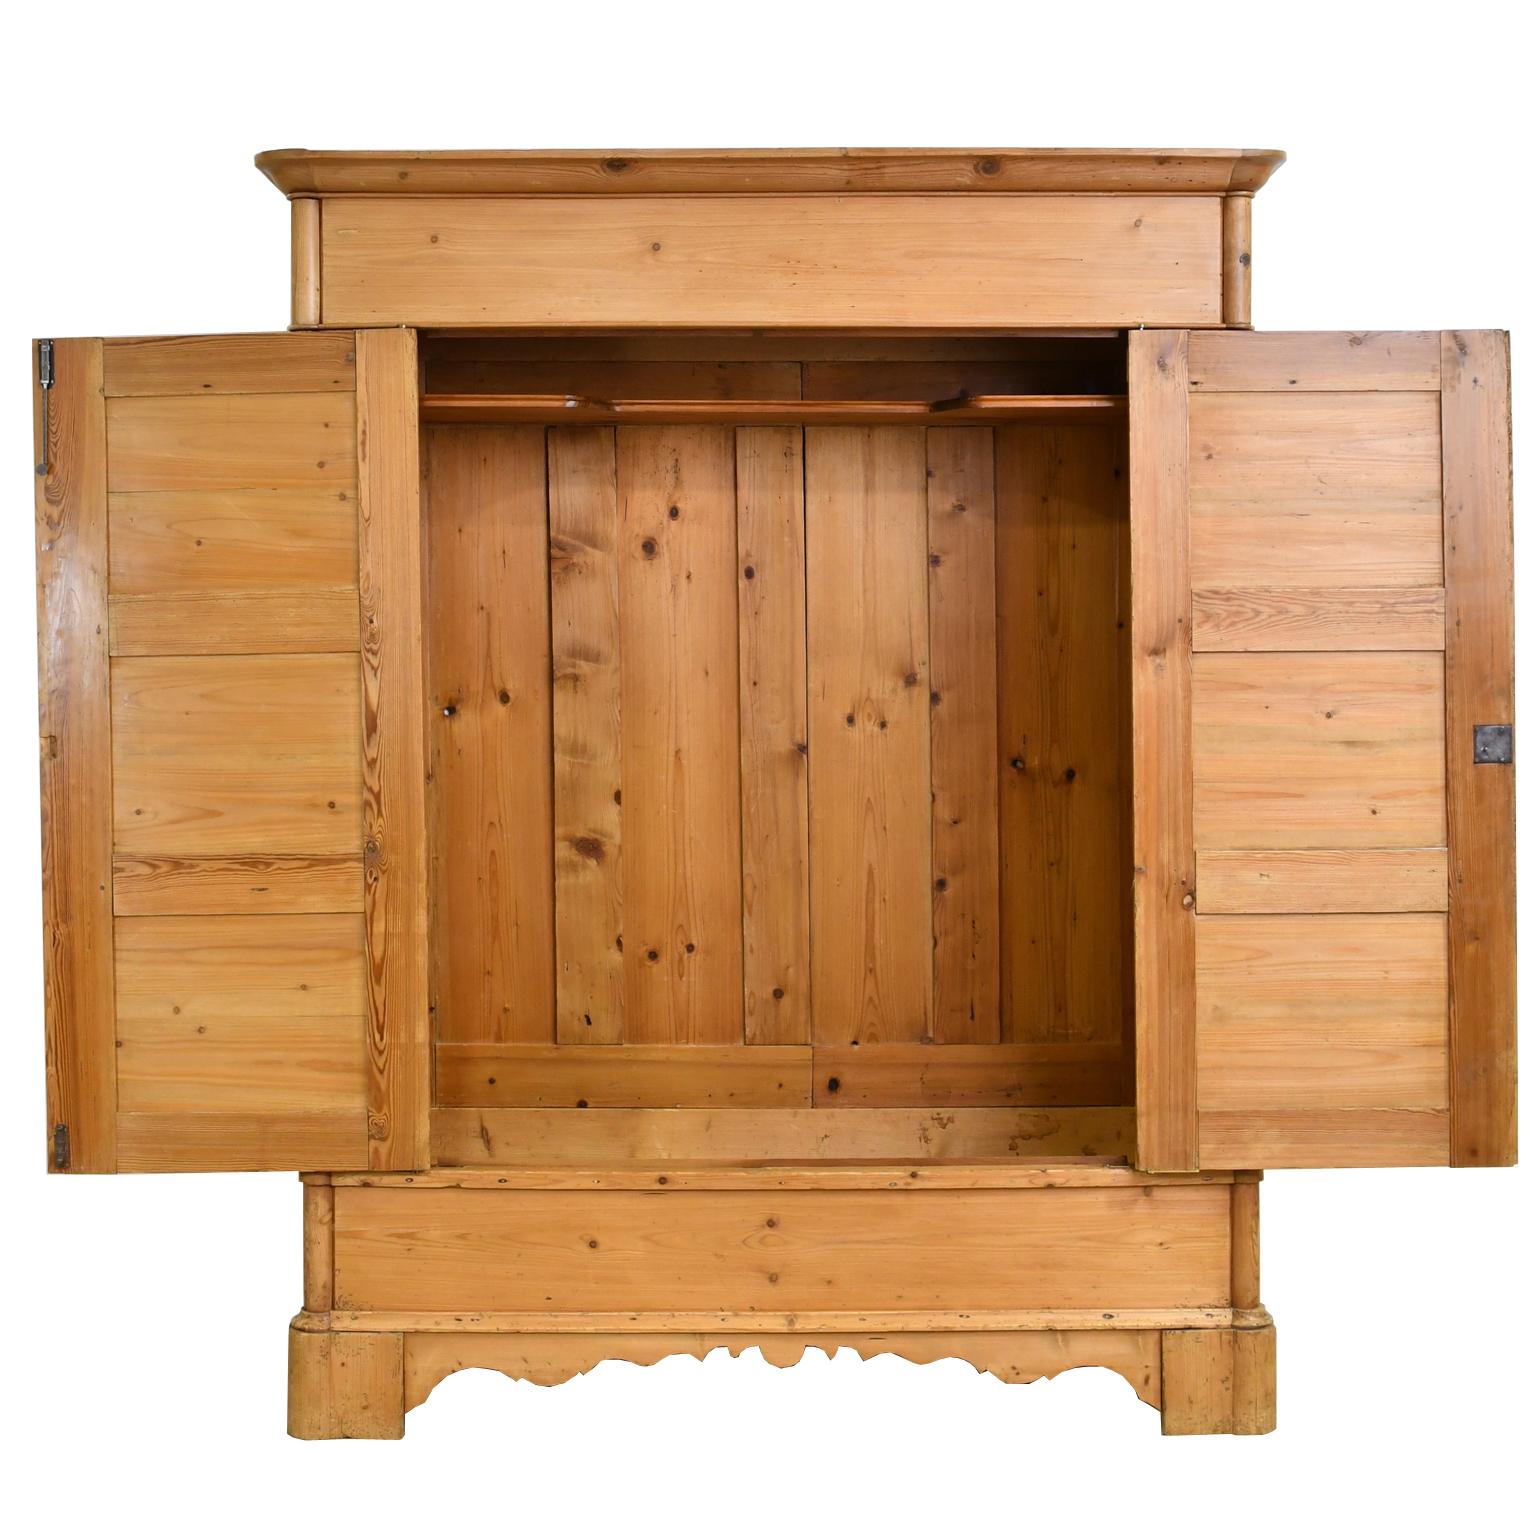 A beautiful large North German armoire in light, honey-colored pine with two doors with three raised panels on each, paneled sides and bracket feet with scalloped apron. Doors open on offset pivot hinges allowing easy access to the armoire's